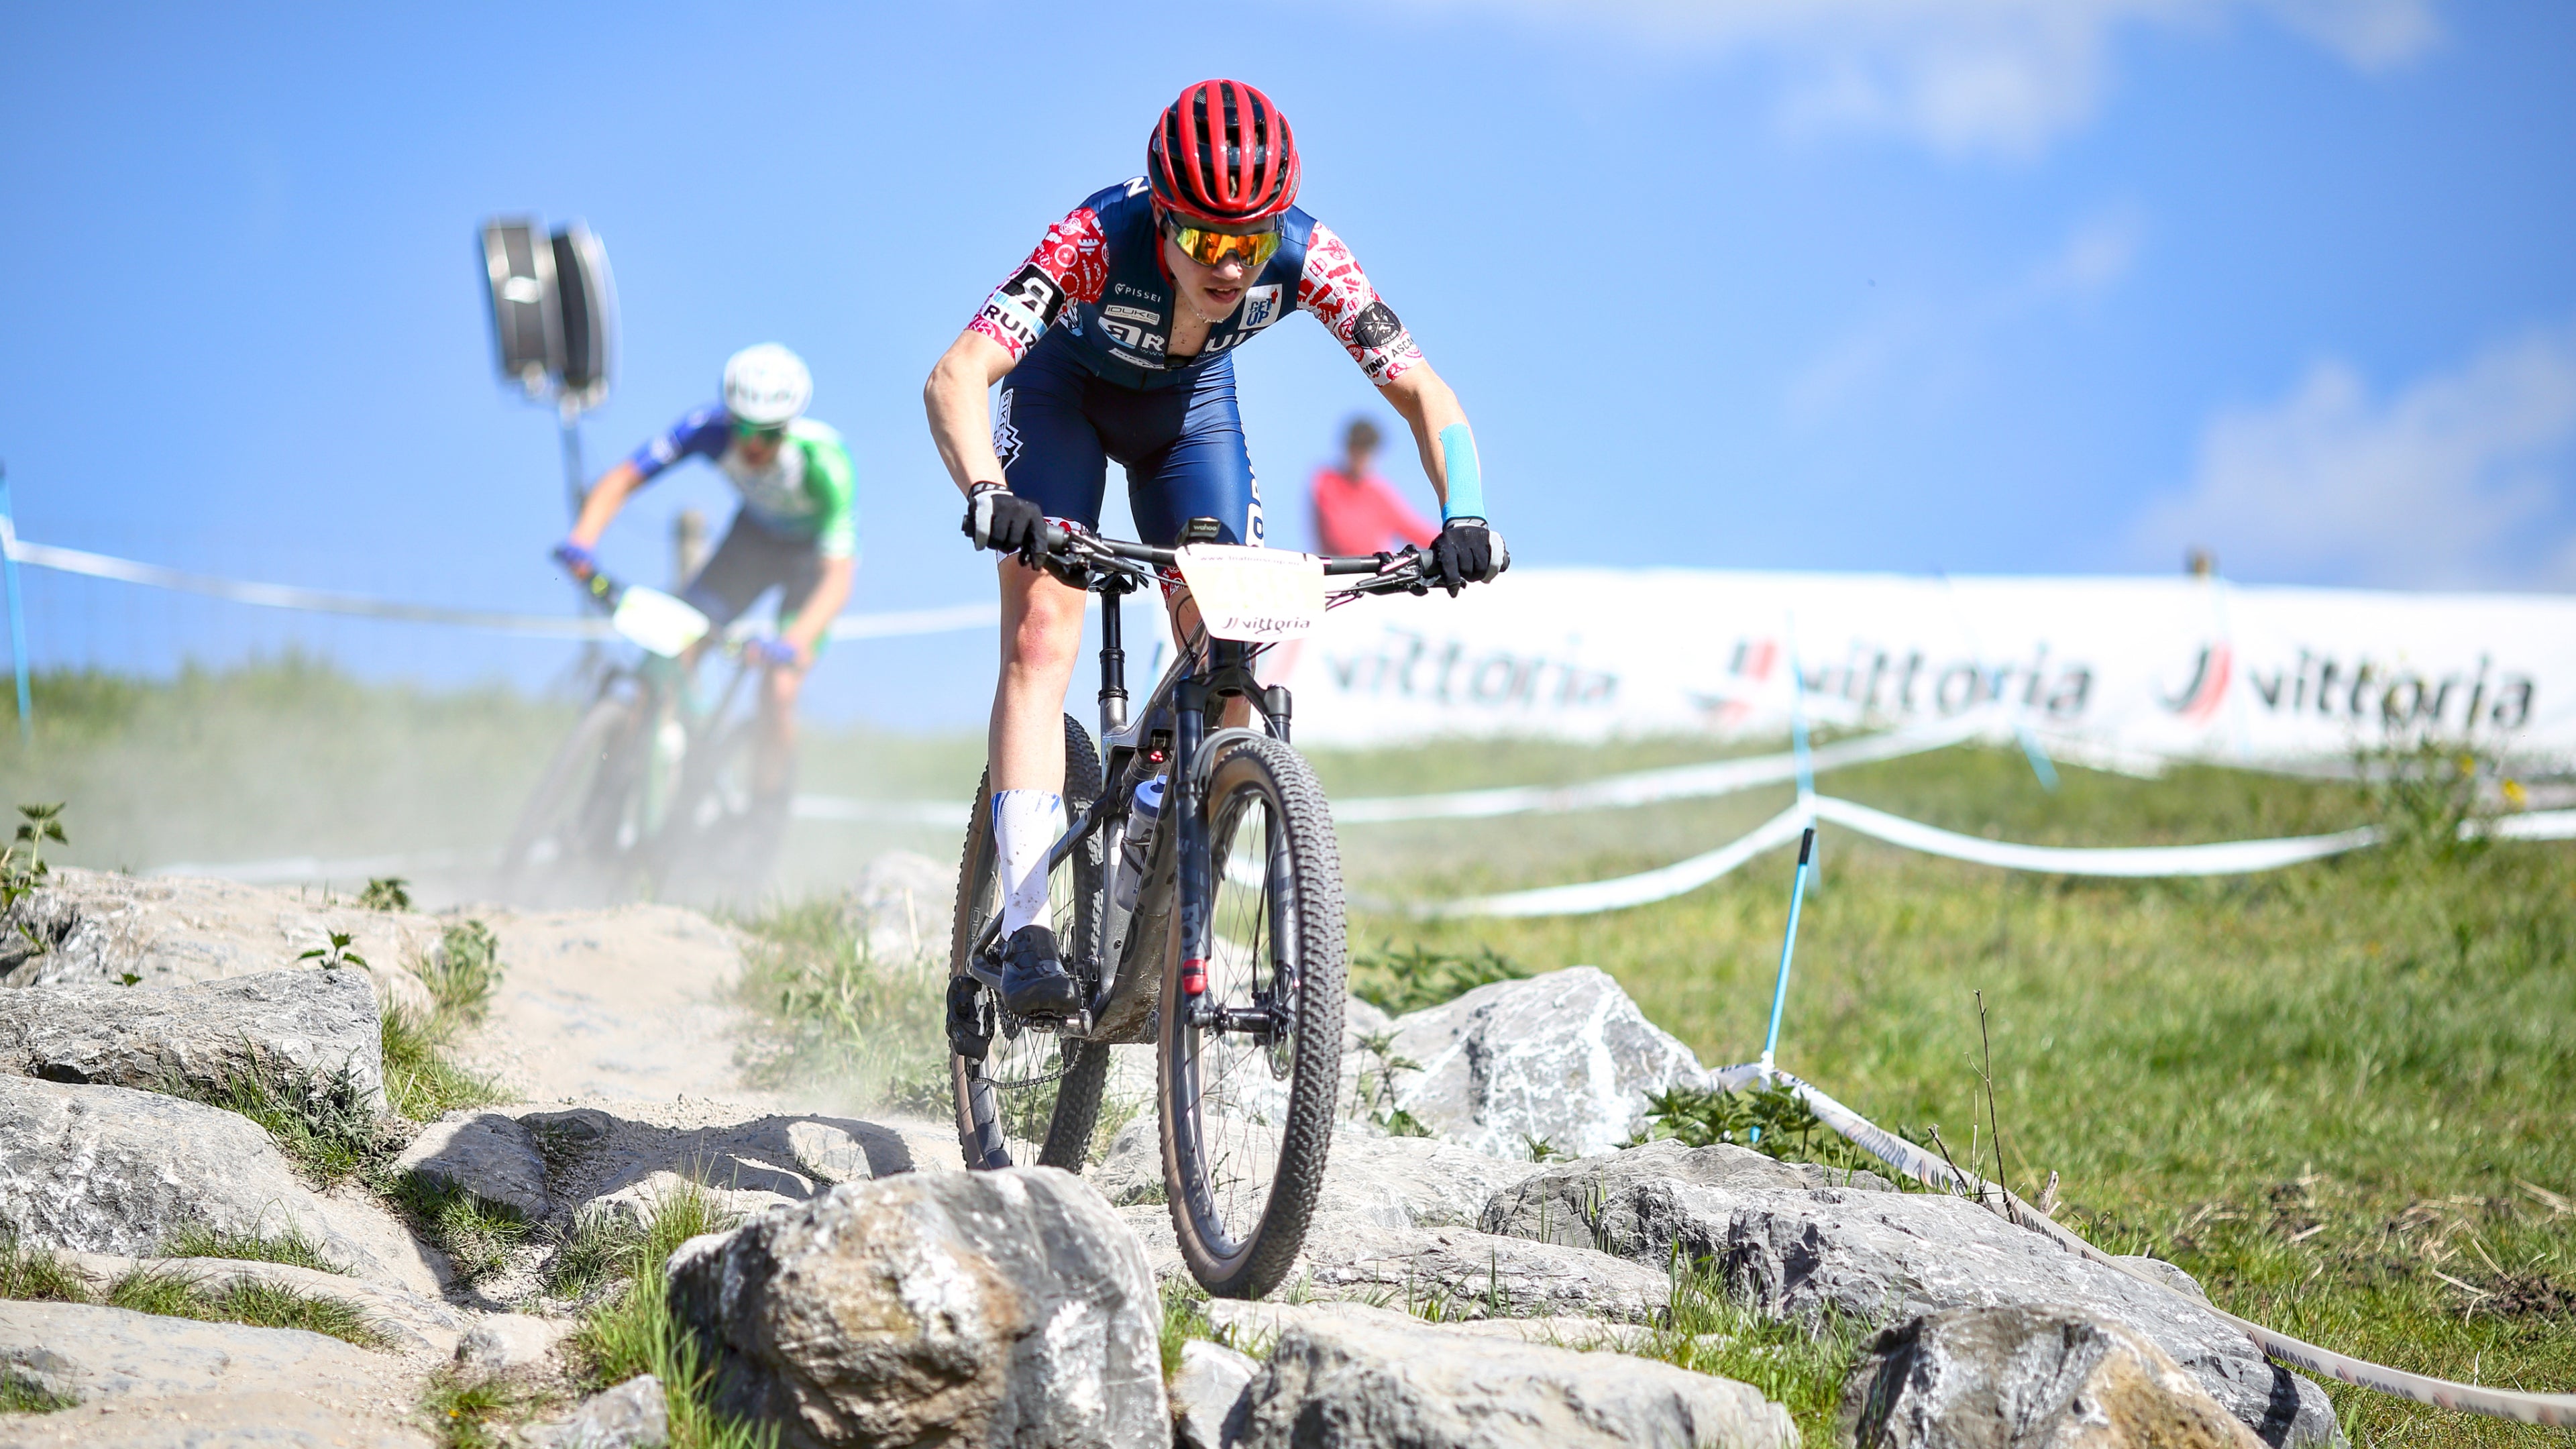 Vittoria 3 Nations Cup XCO Mountainbike 2024 is set to start